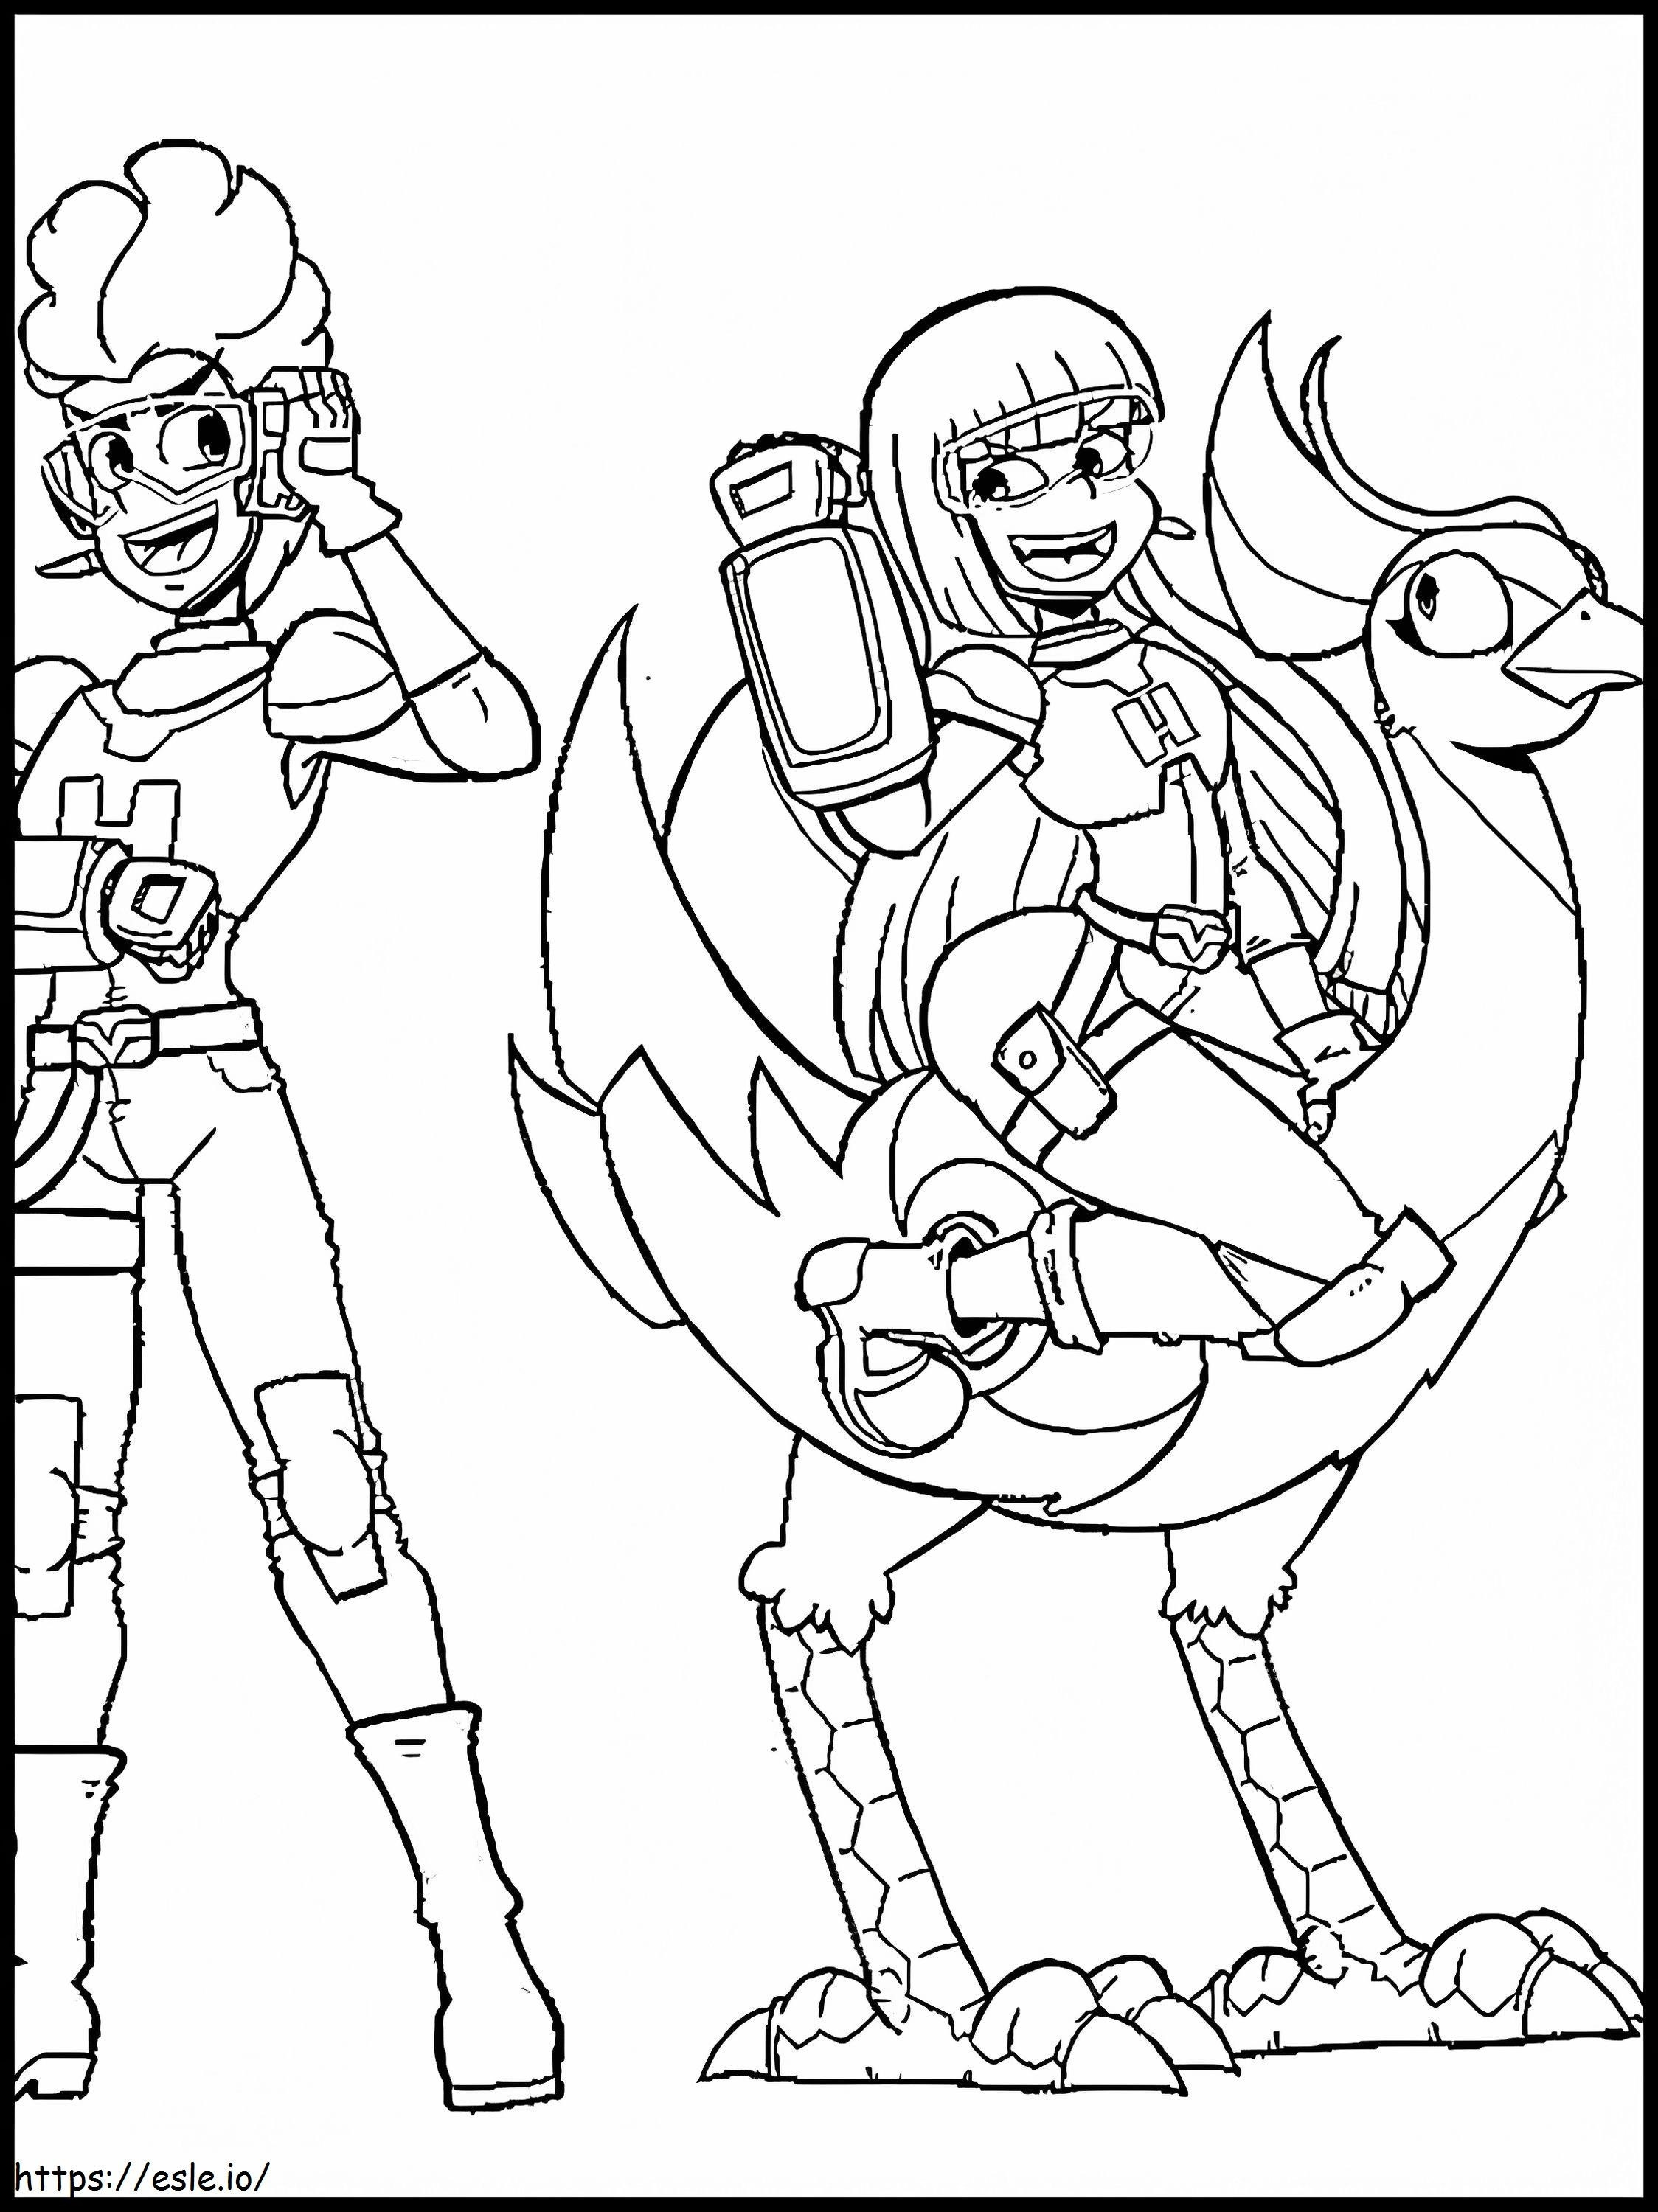 Characters In Glitch Techs coloring page